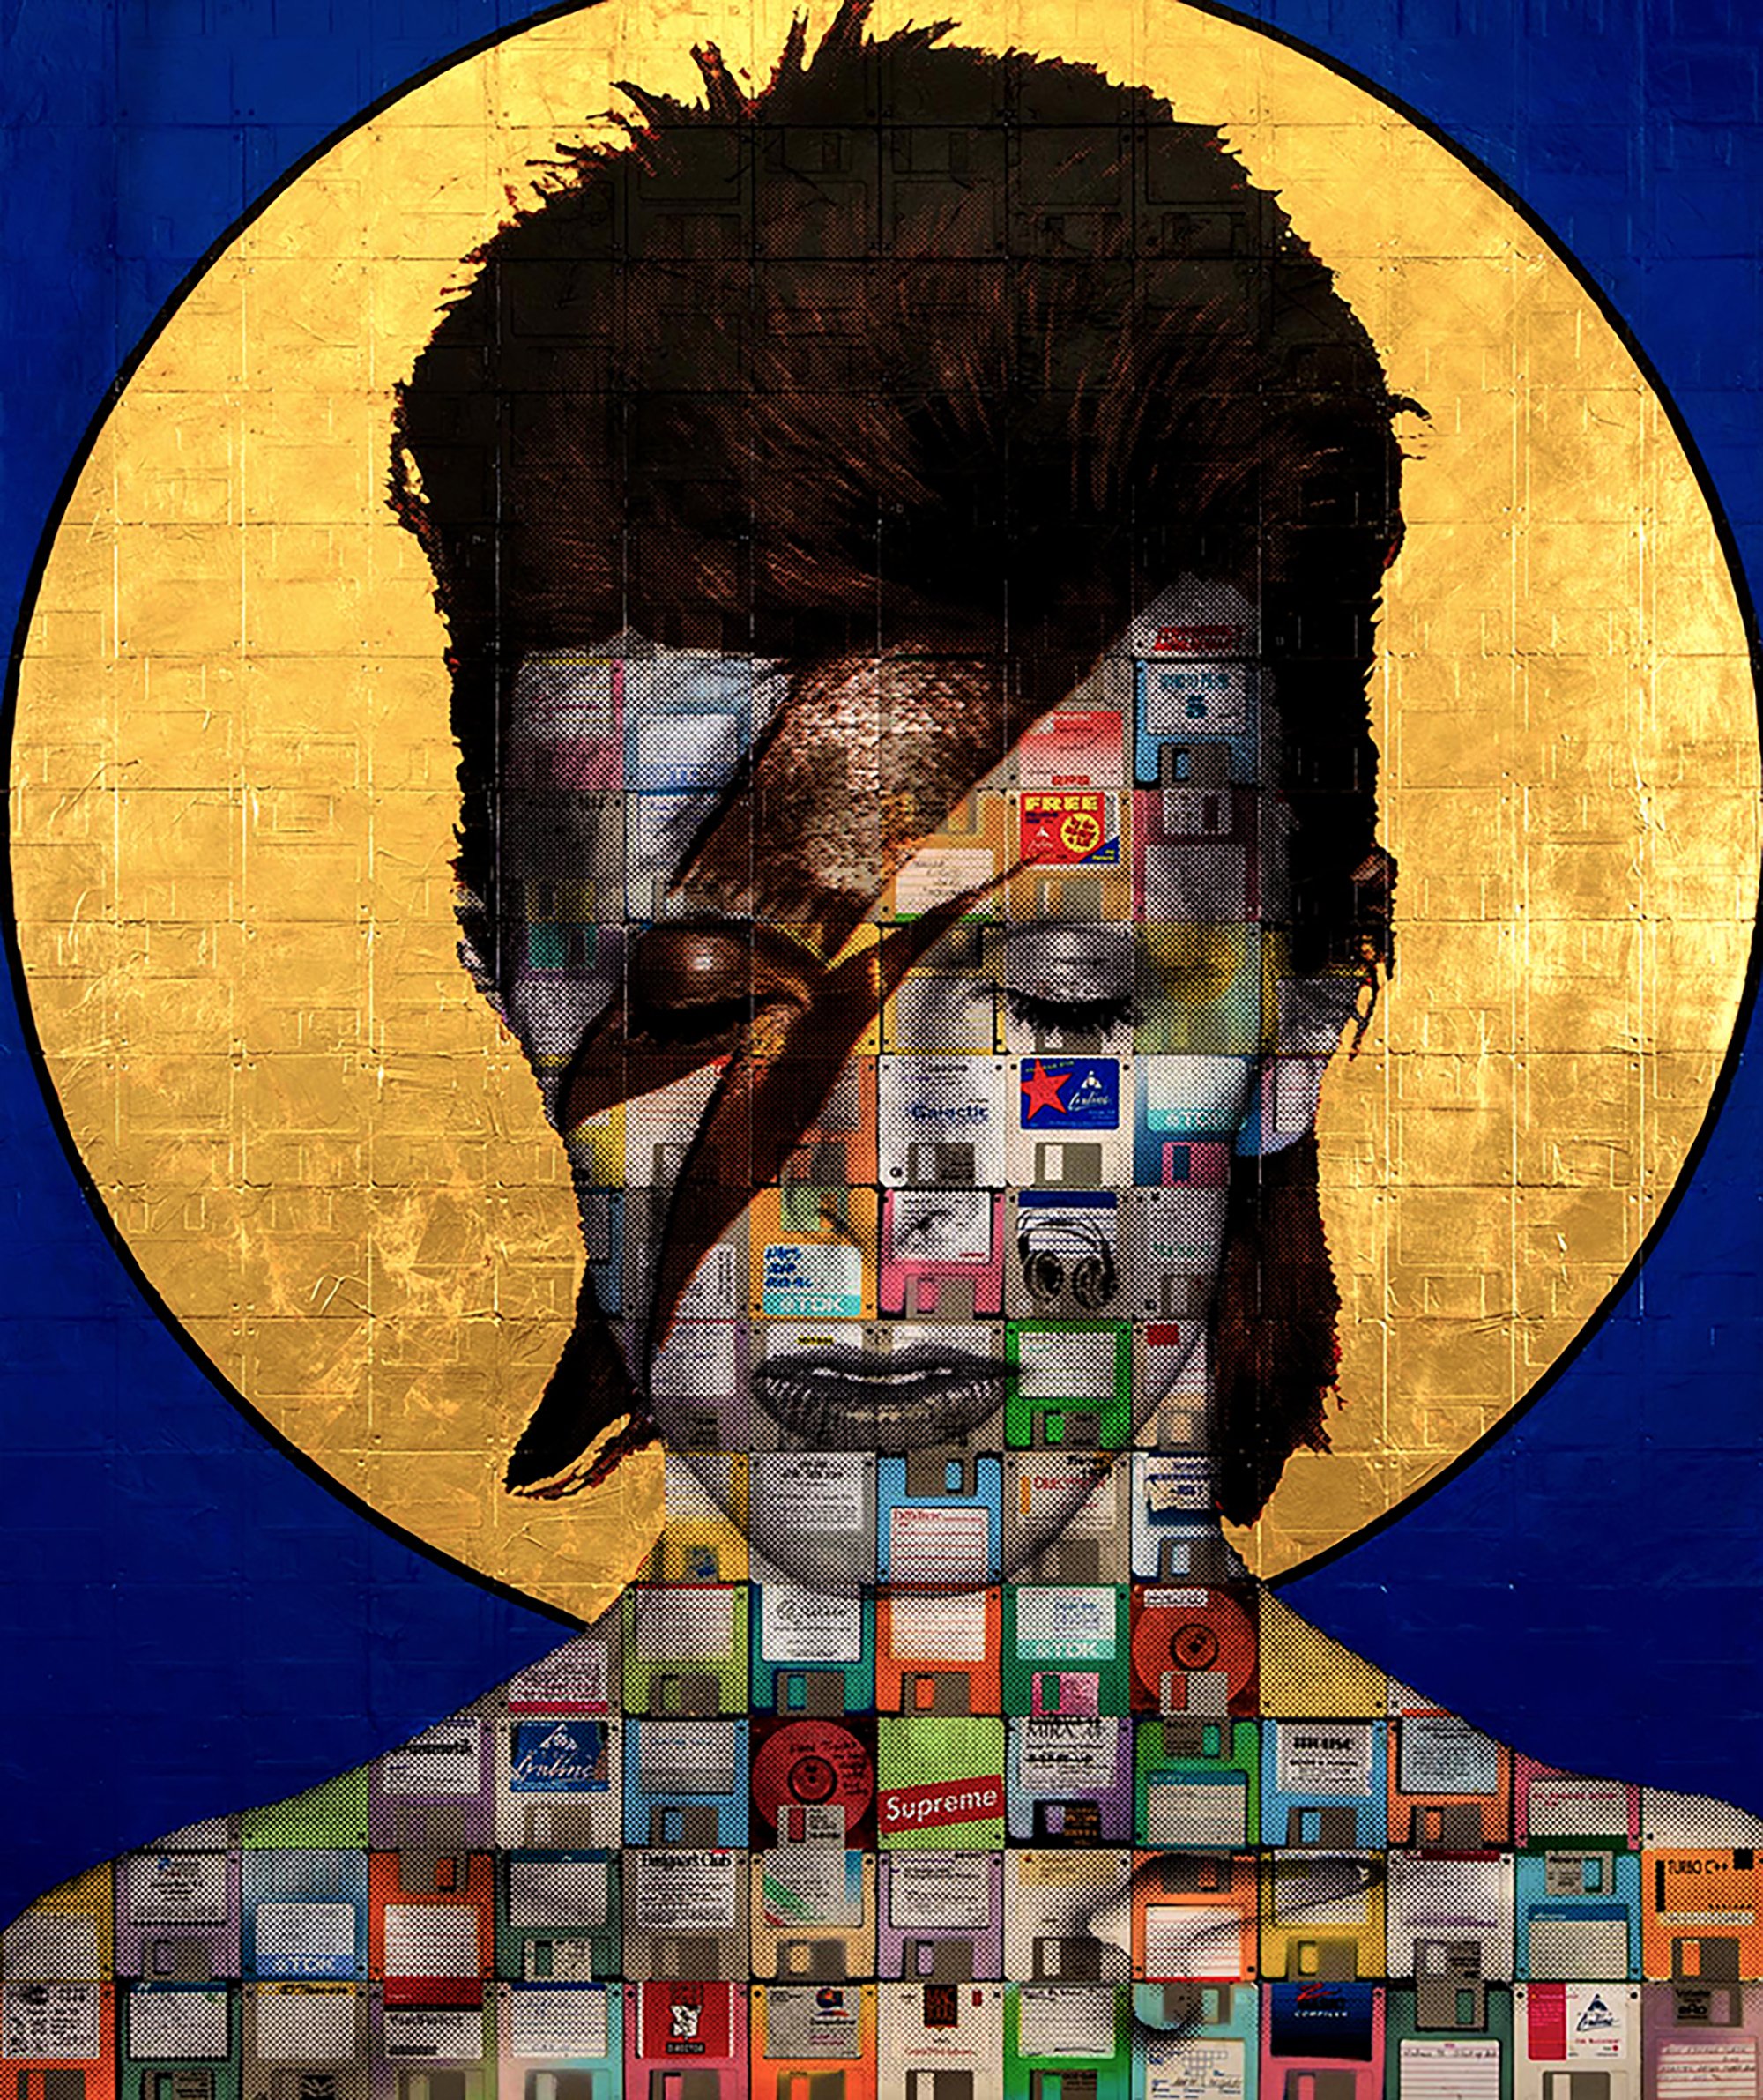 "Ziggy Stardust v2.0" David Bowie painting on recycled computer floppy disks